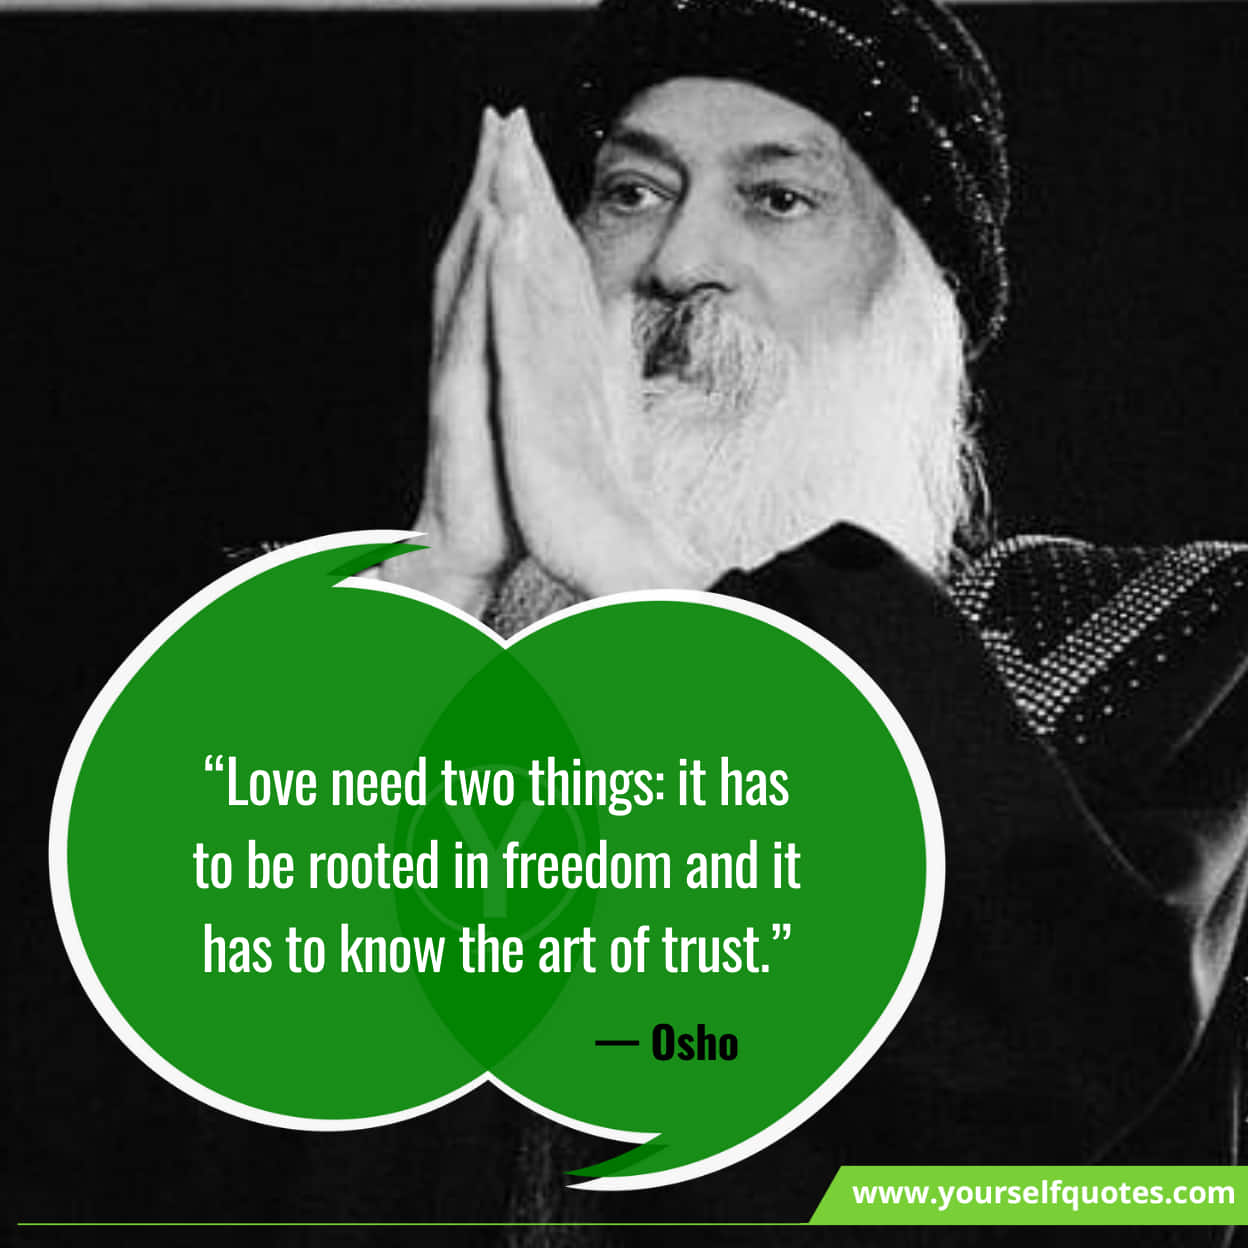 Osho Quotes On Life